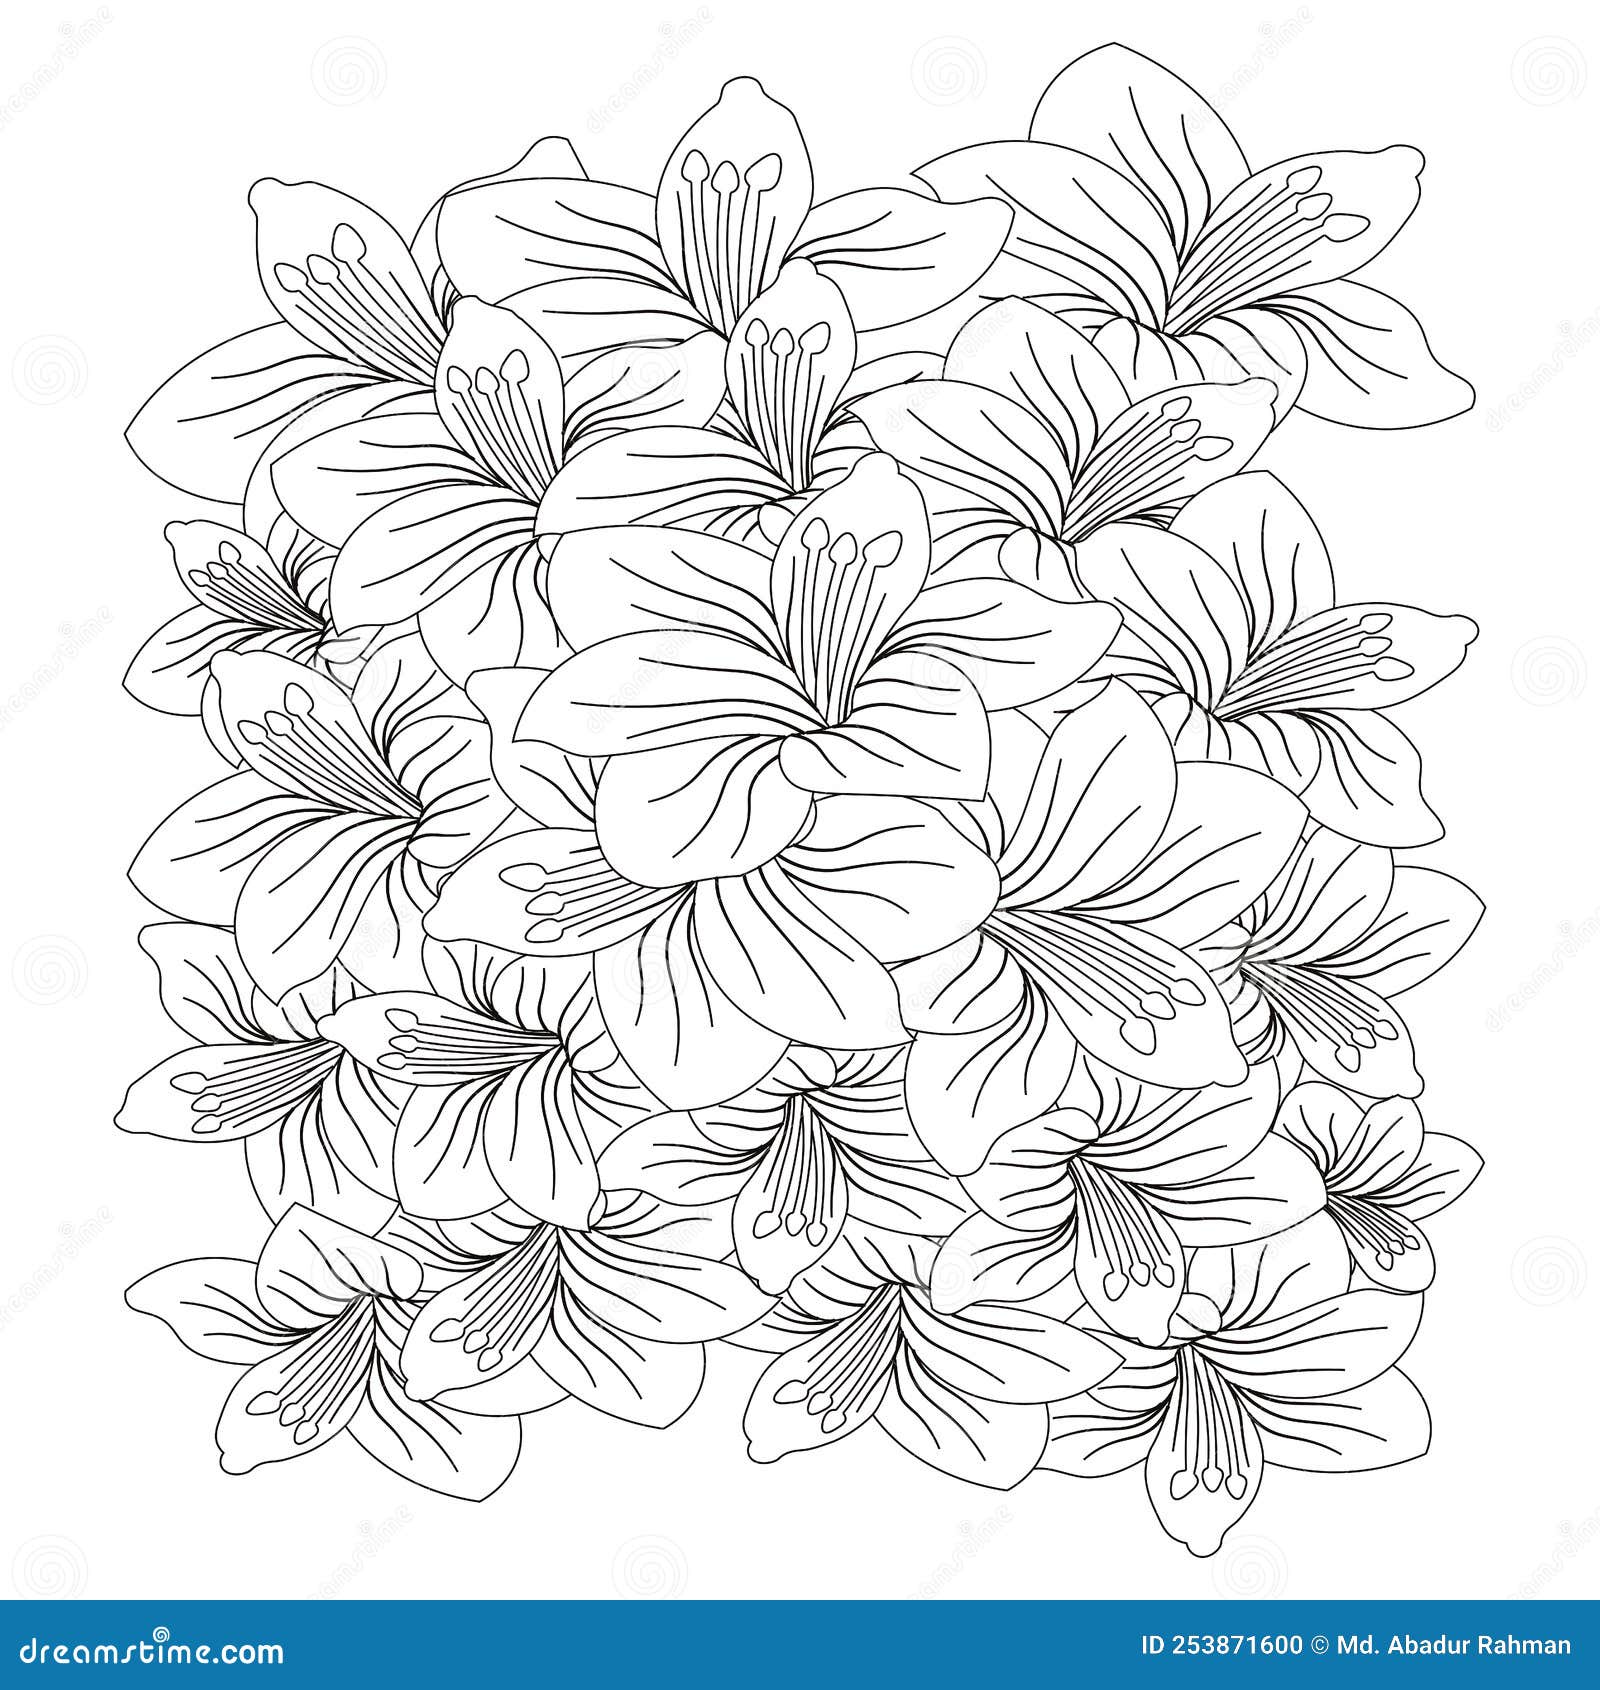 Pencil drawing flowers Black and White Stock Photos & Images - Alamy